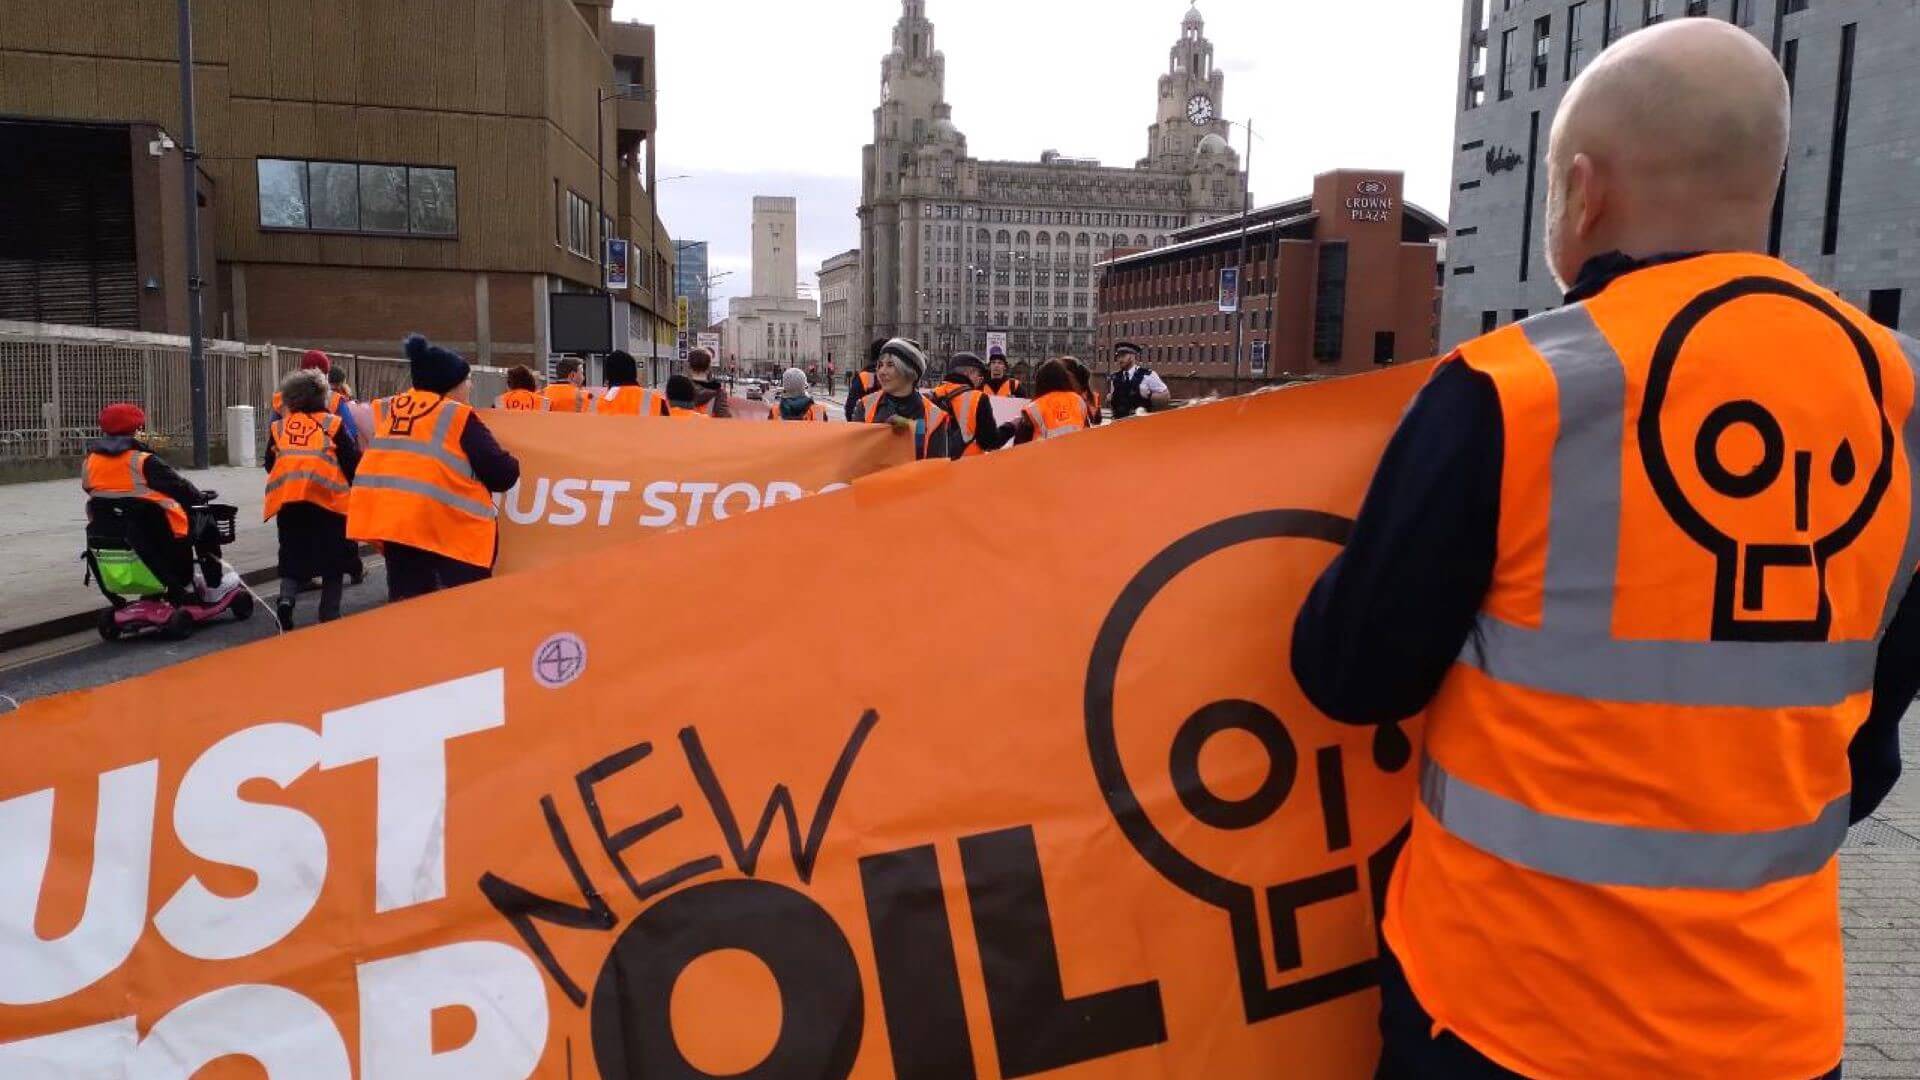 Close up of Just Stop Oil orange banner being held by a protester with back to camera and other protesters in orange jackets extending into distance